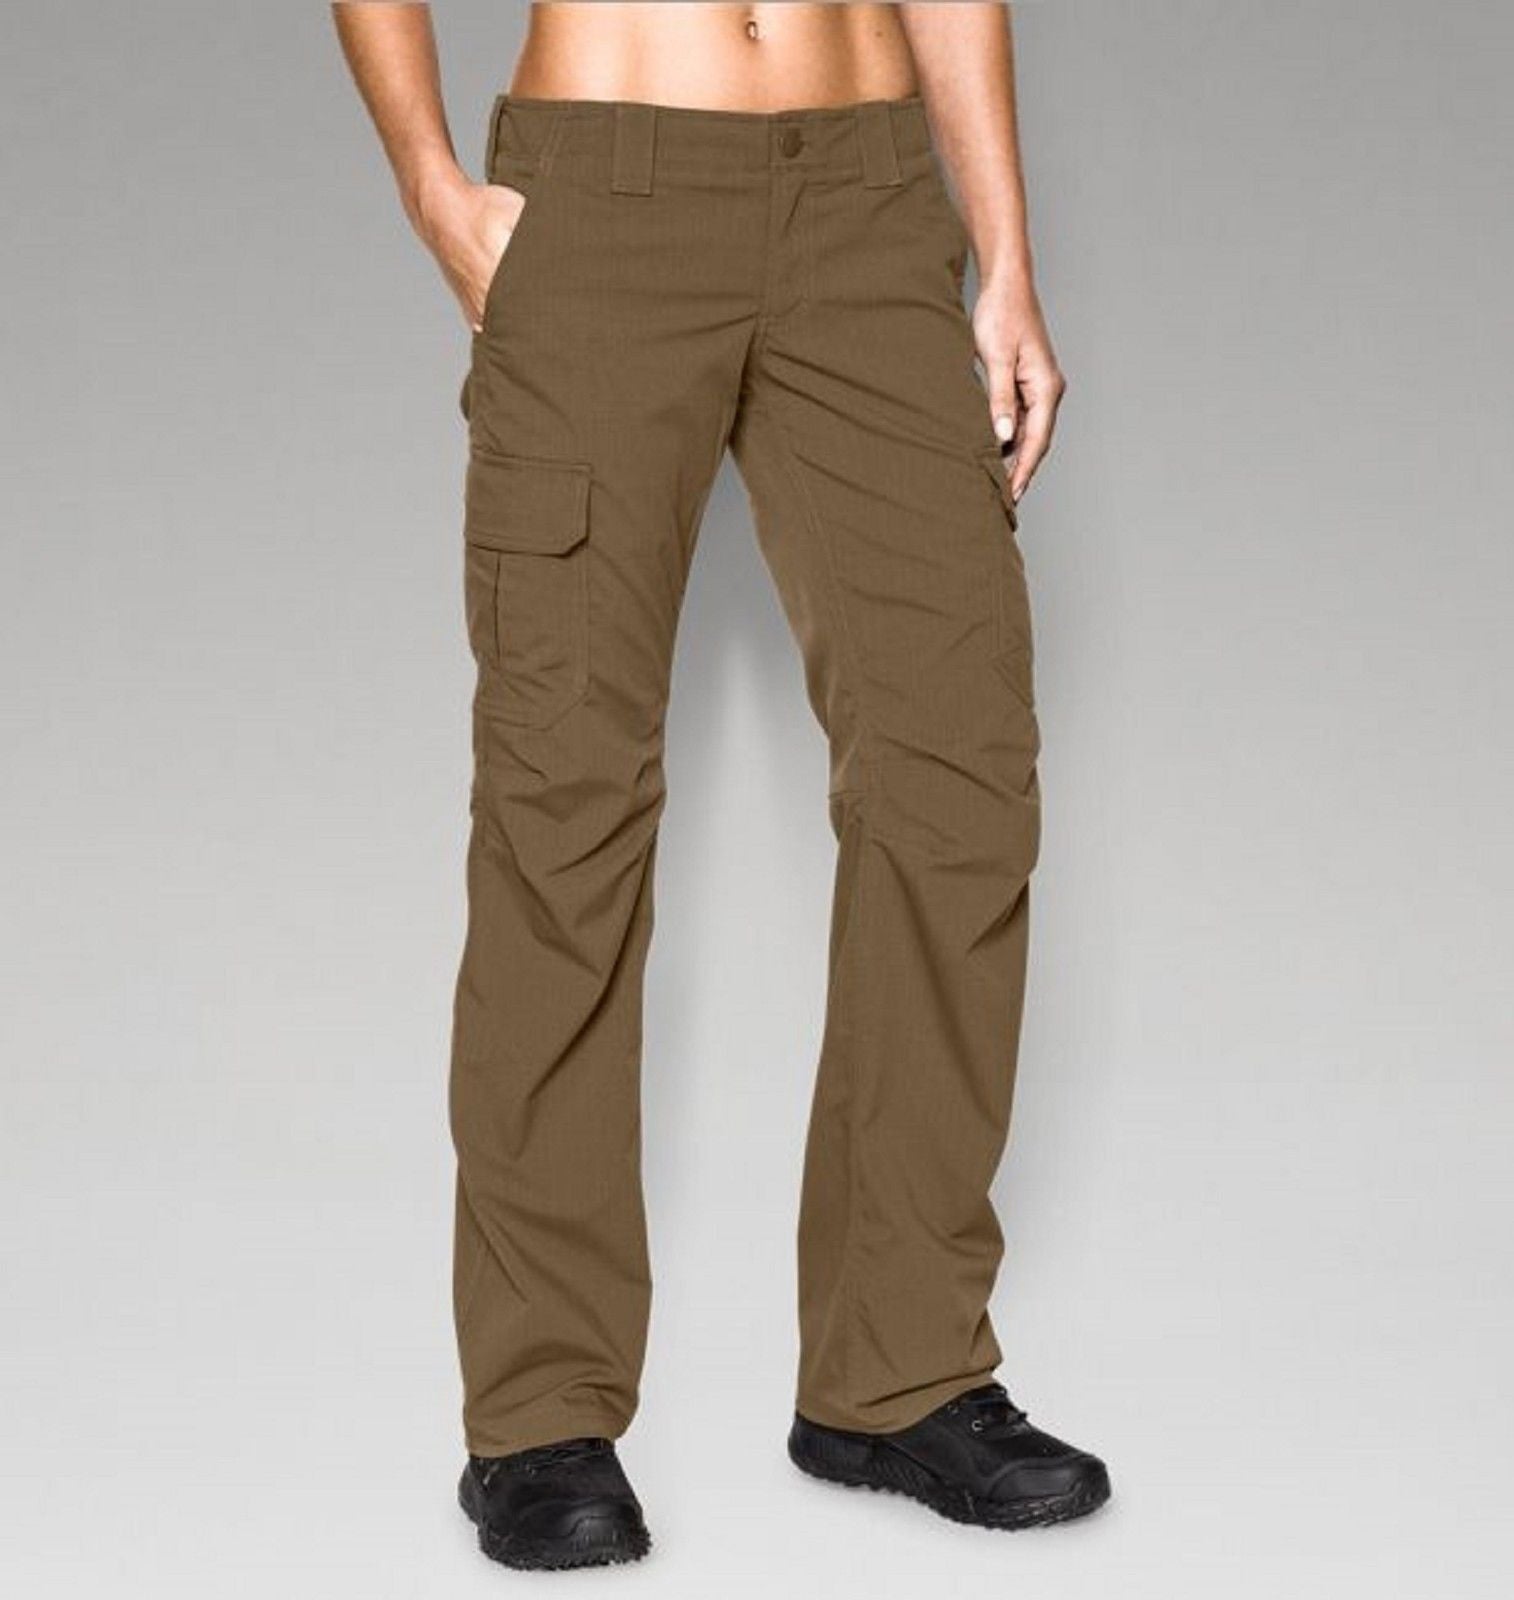 Under Armour Womens Tactical Patrol Pant - UA Loose-Fit Field Duty Car ...